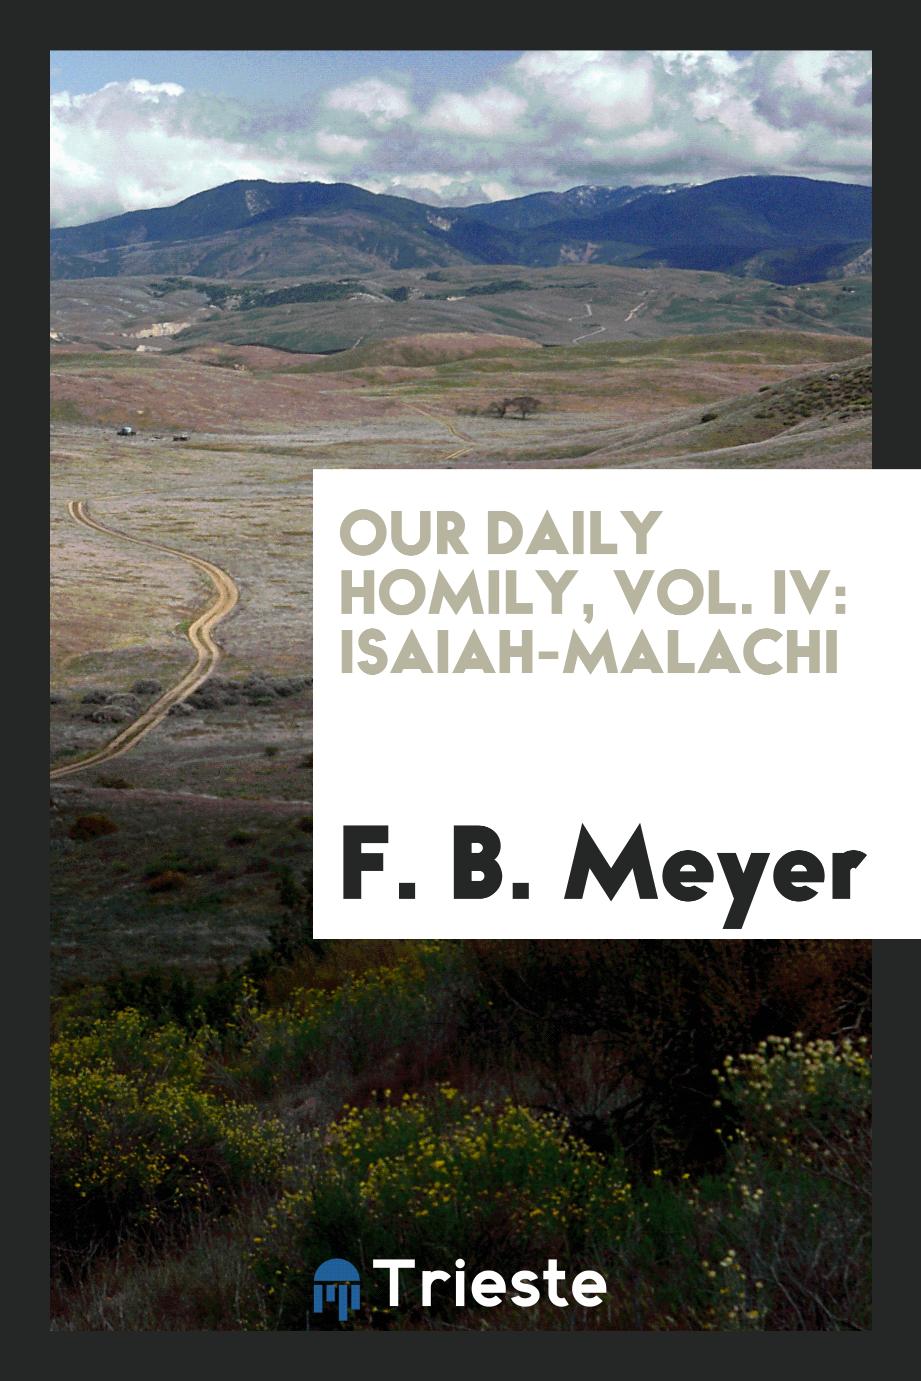 Our daily homily, Vol. IV: Isaiah-Malachi